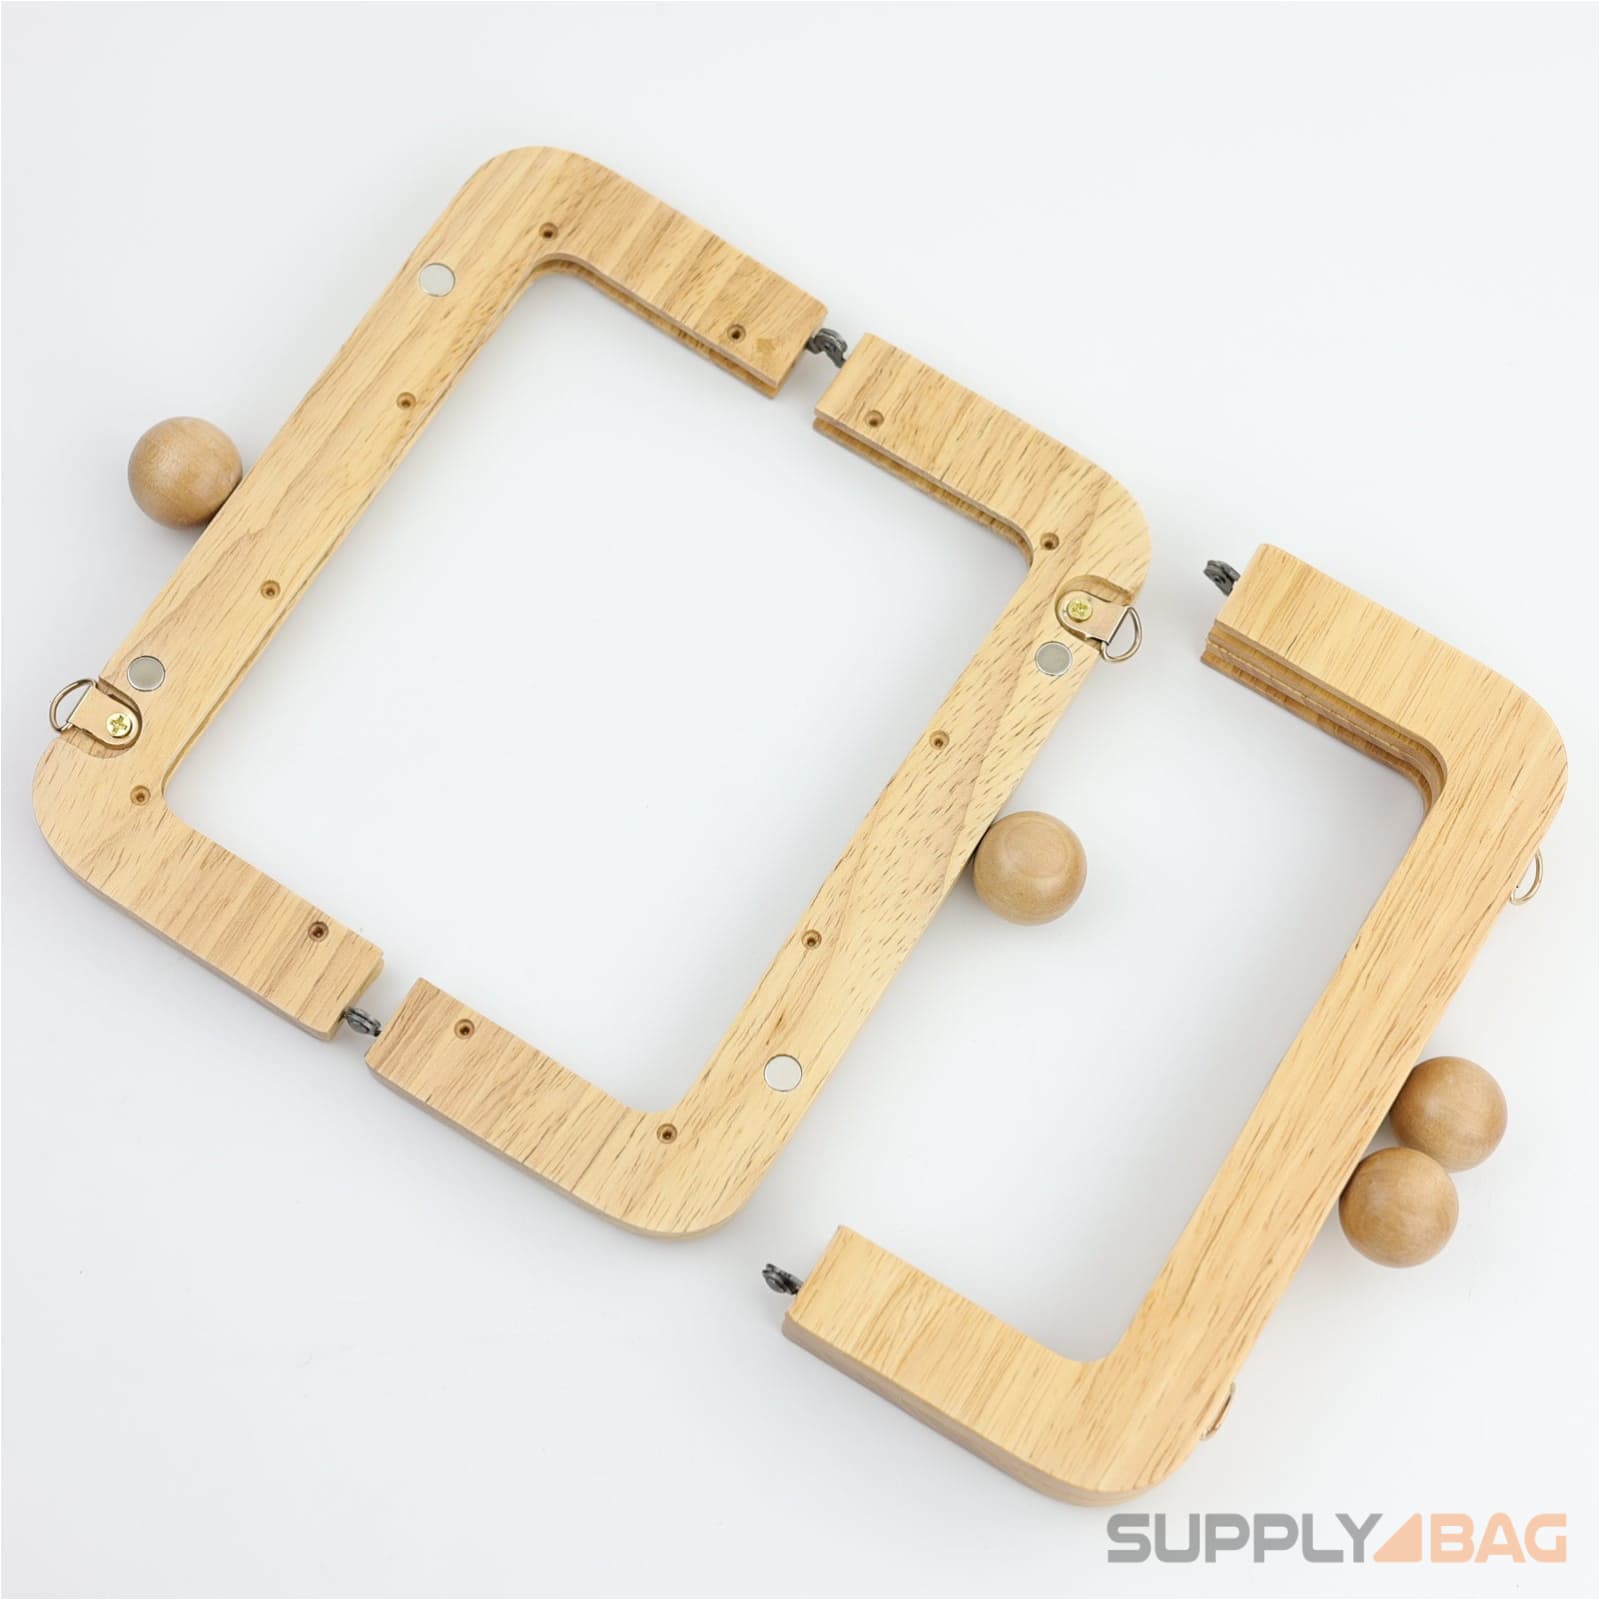 7 7/8 x 3 1/2 inch - Wooden Clutch Frame with Chain Loops